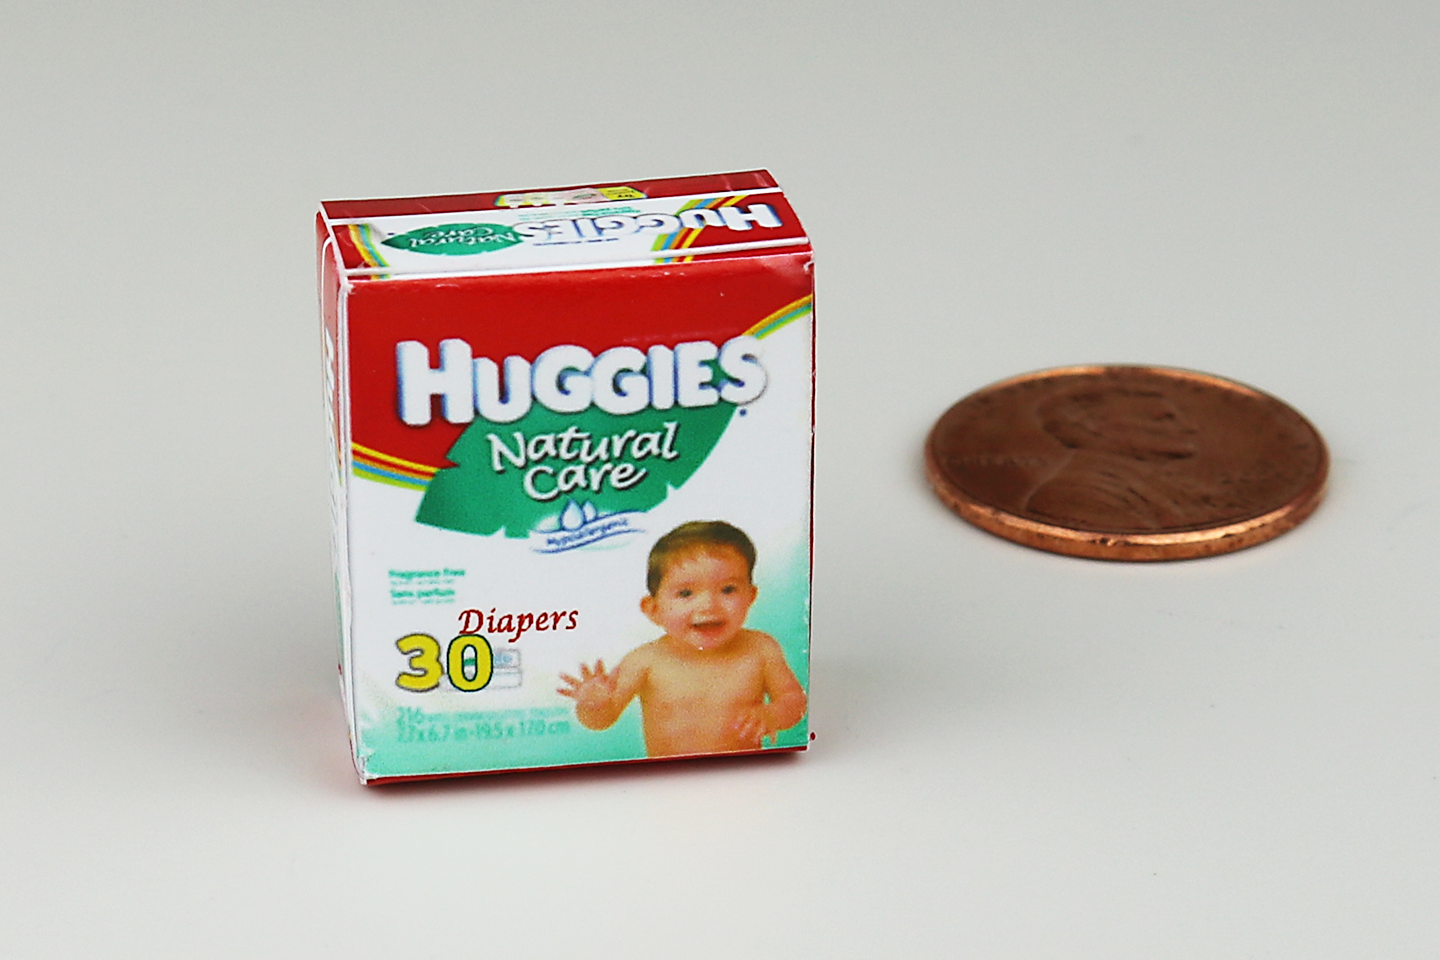 Box of Diapers (White)